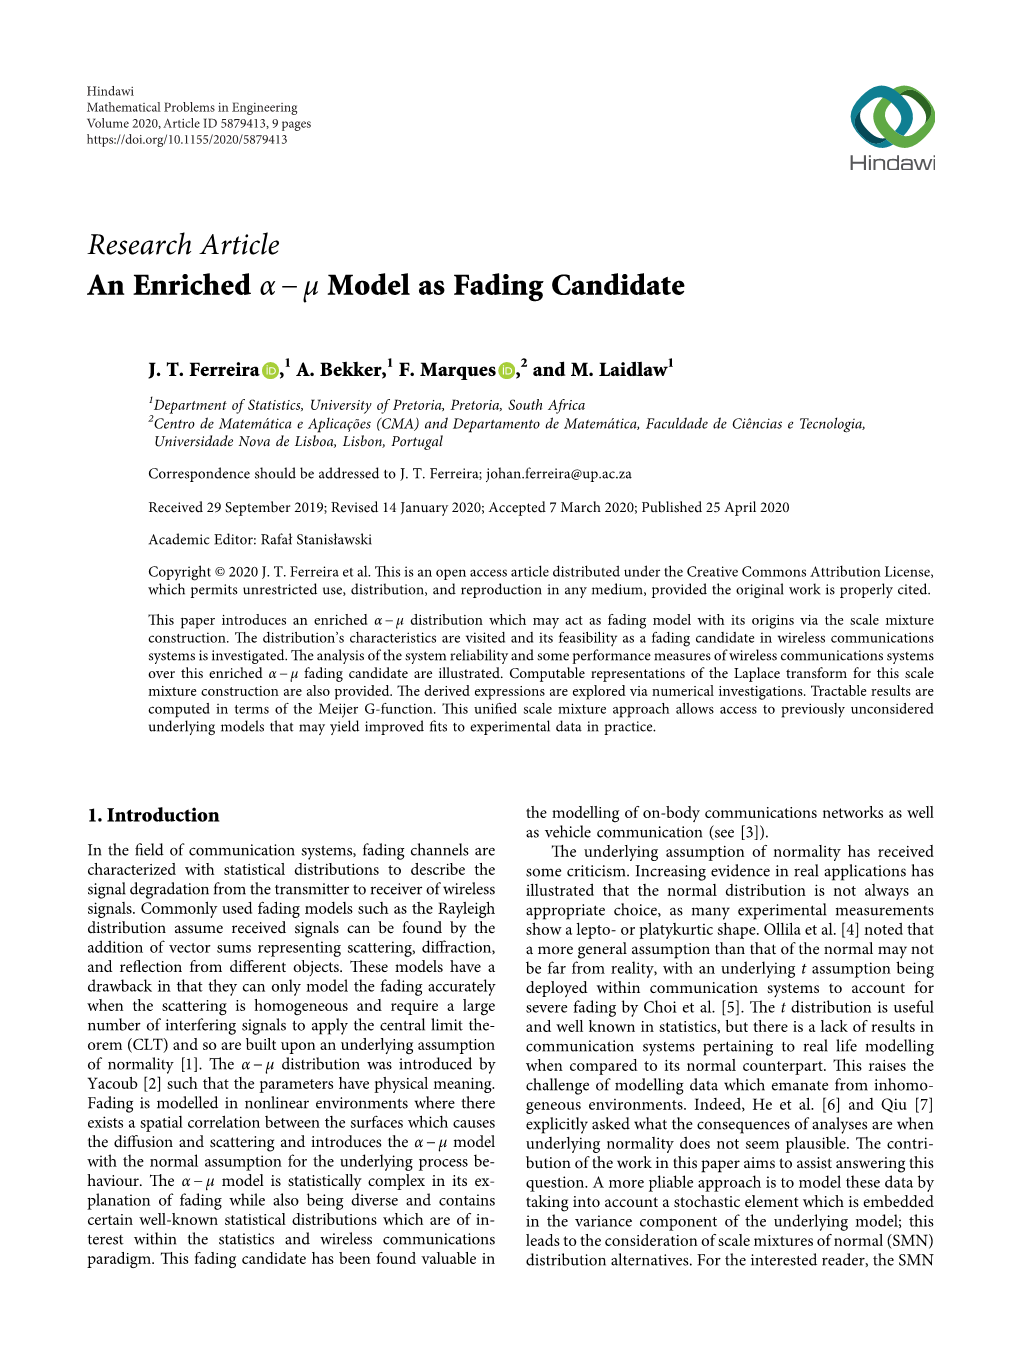 An Enriched Α− Μ Model As Fading Candidate